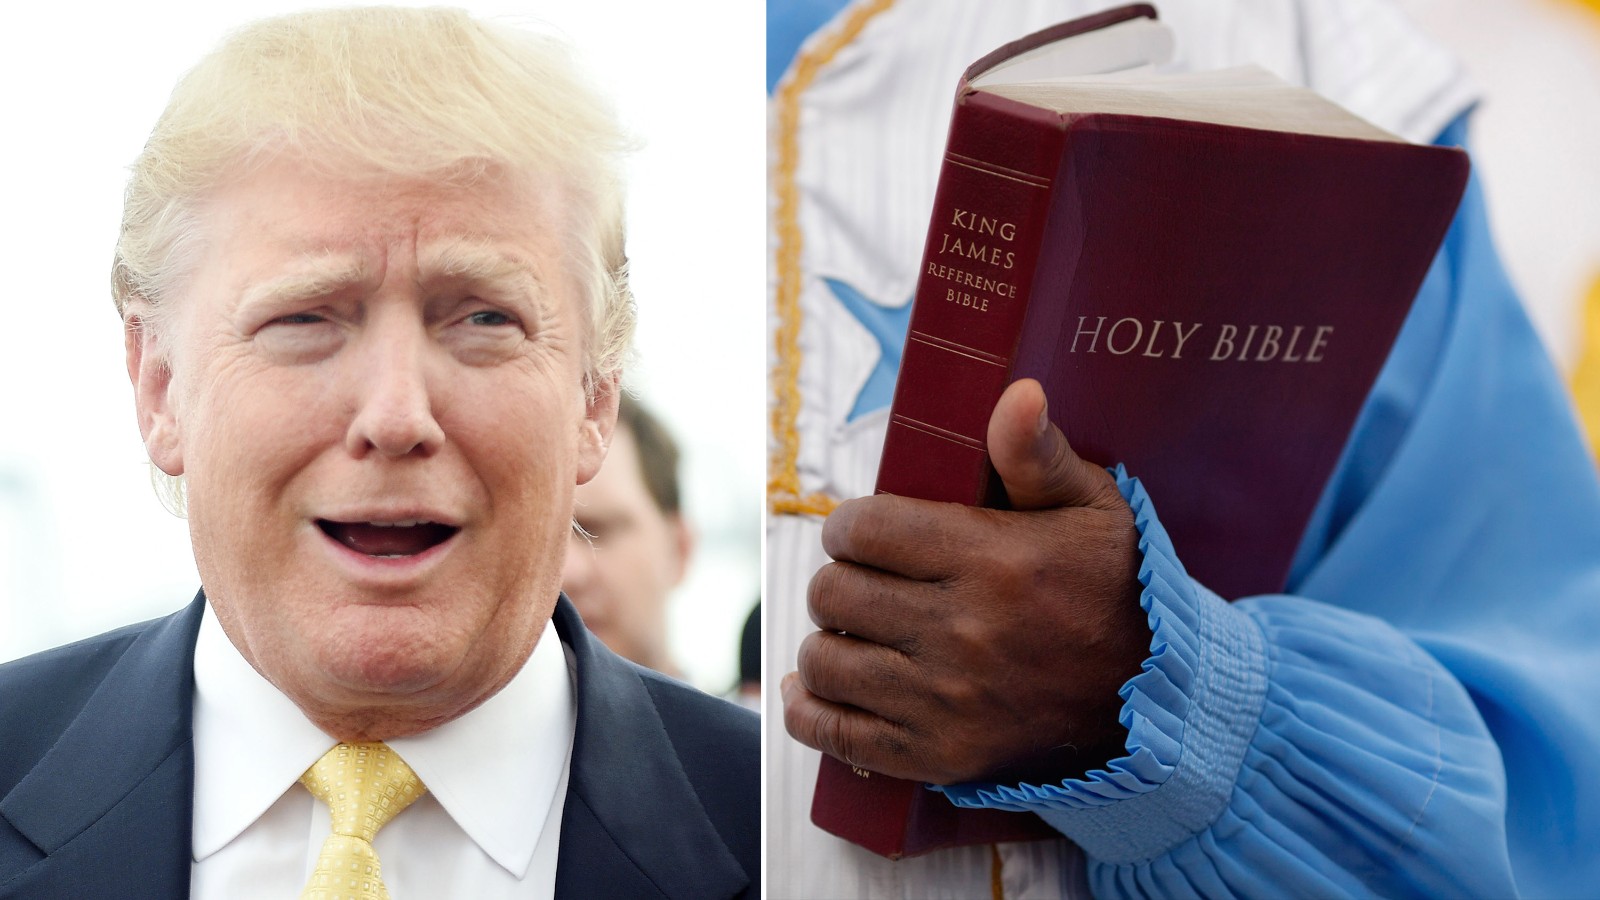 What Bible verse does Donald Trump have memorized?